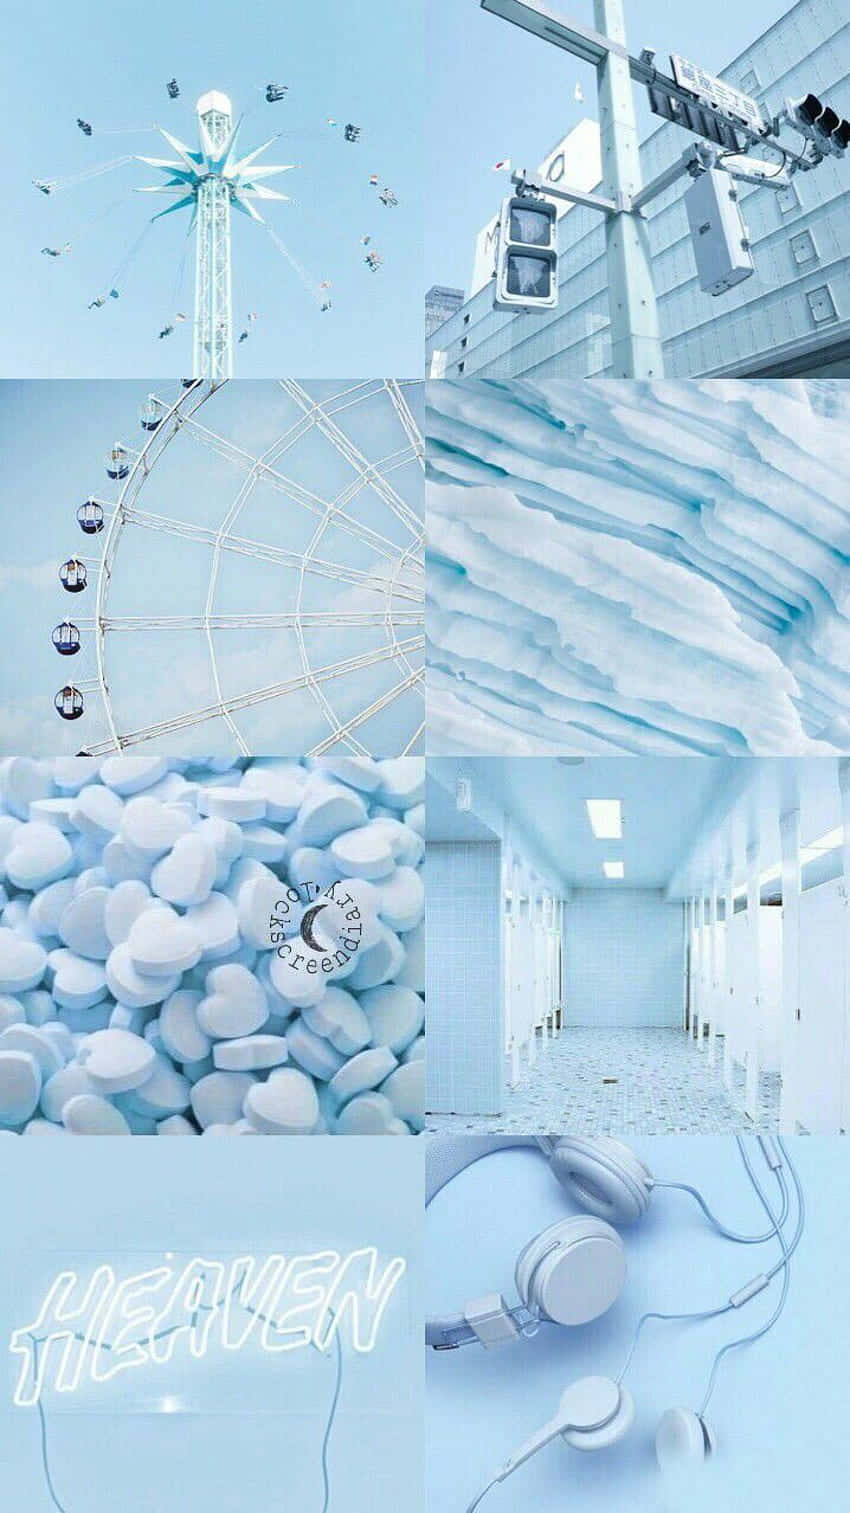 Get inspired by this beautiful pastel blue aesthetic! Wallpaper